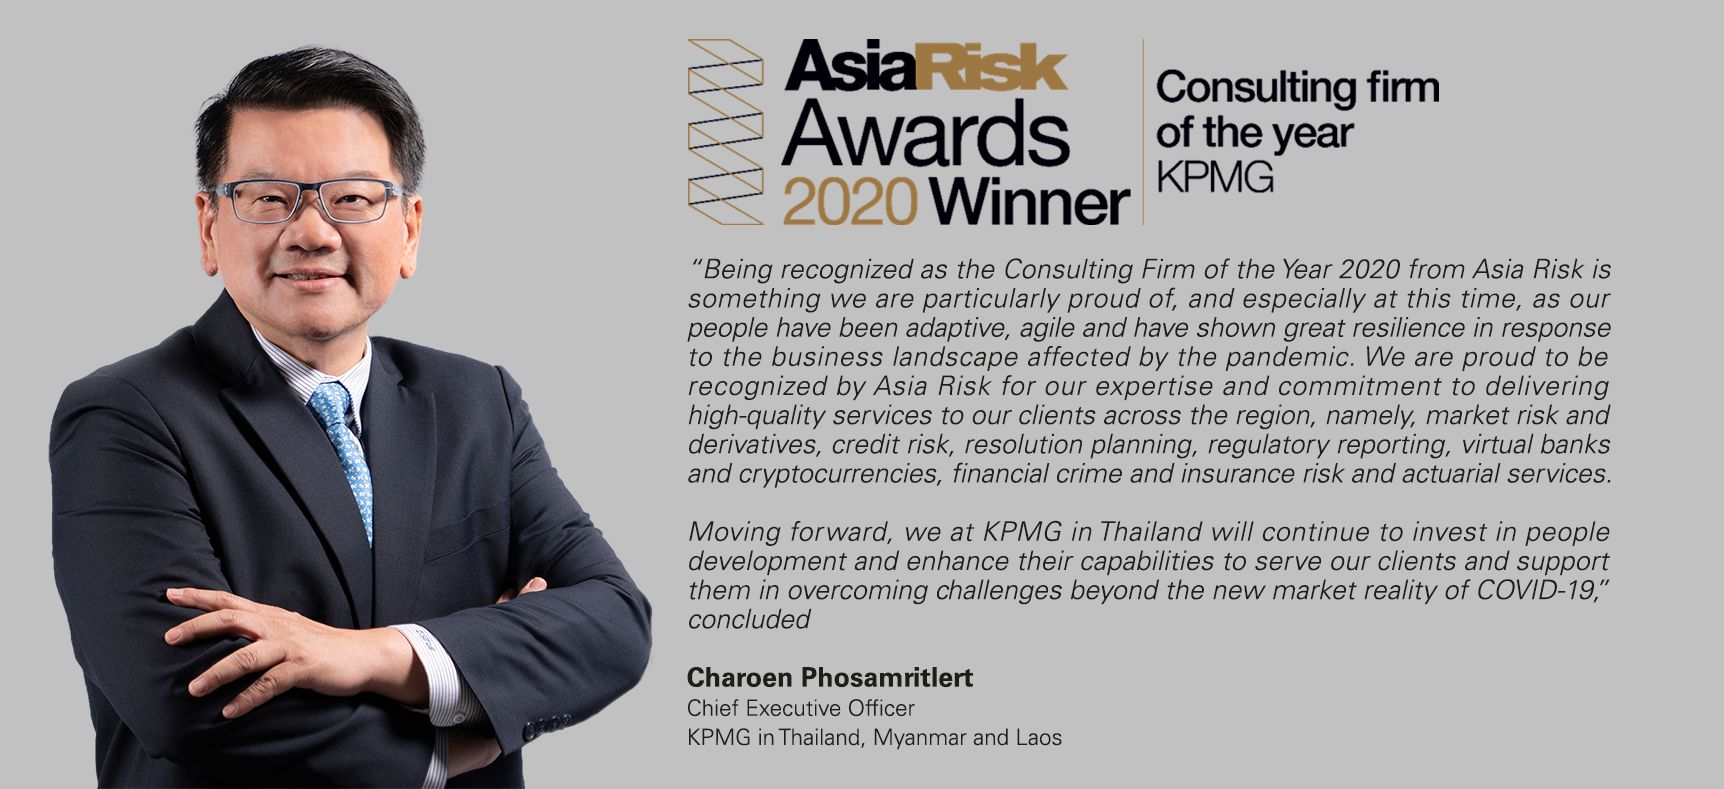 KPMG is Consulting Firm of the Year – Asia Risk Awards 2020